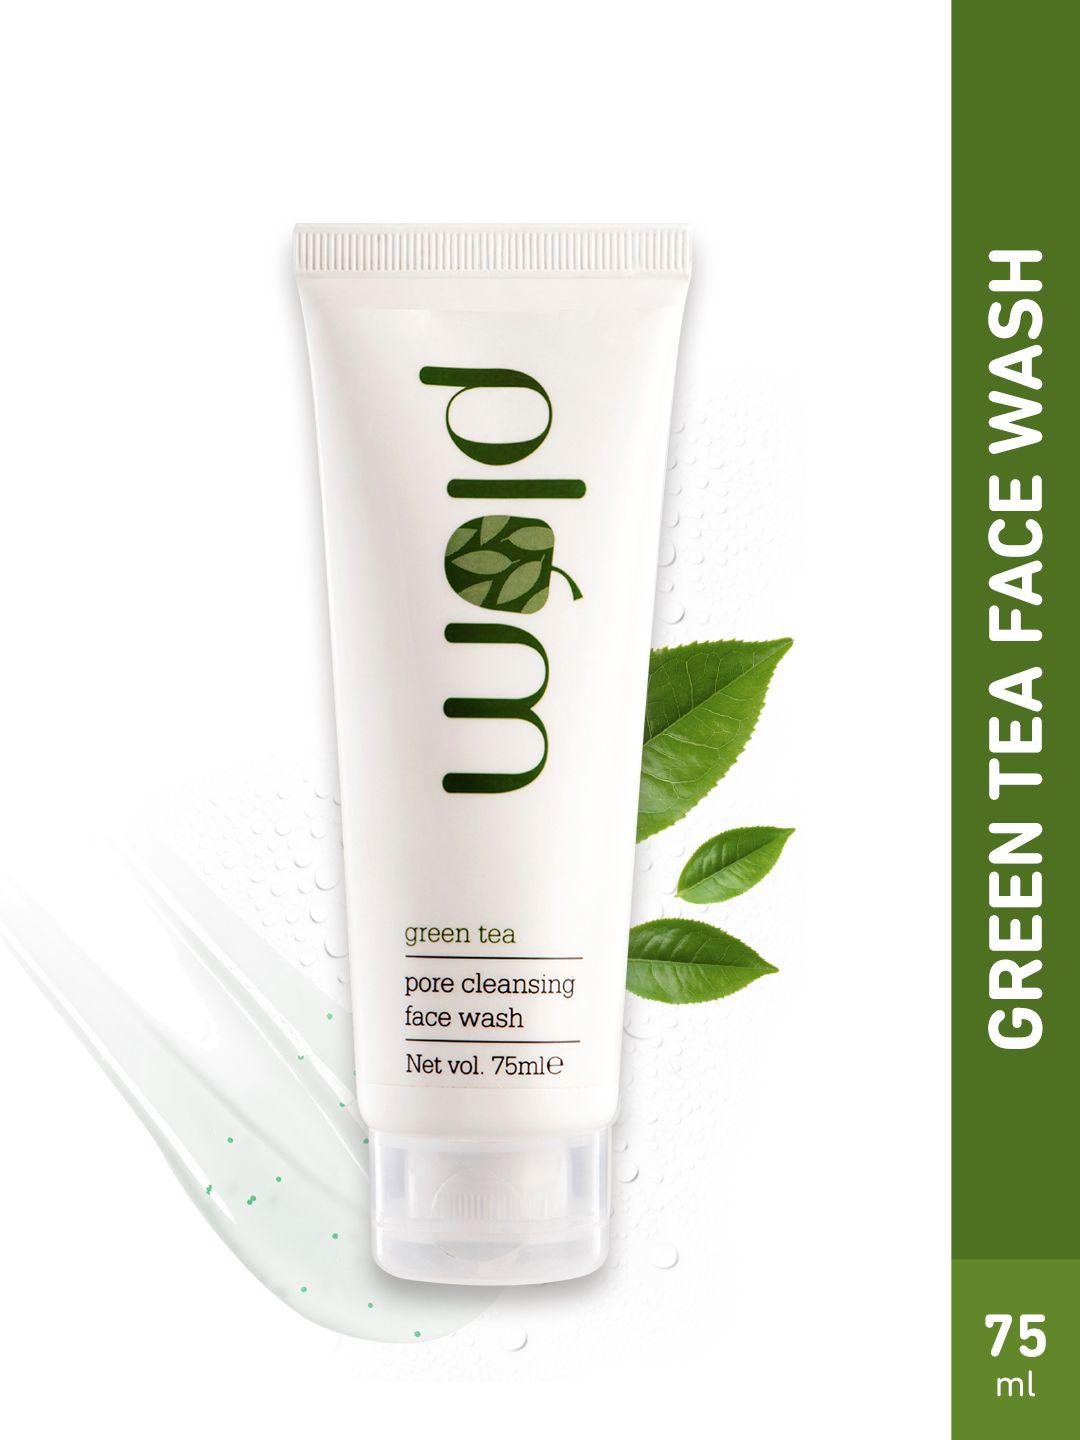 plum green tea range pore cleansing sustainable face wash-oily or acne-prone skin - 75 ml